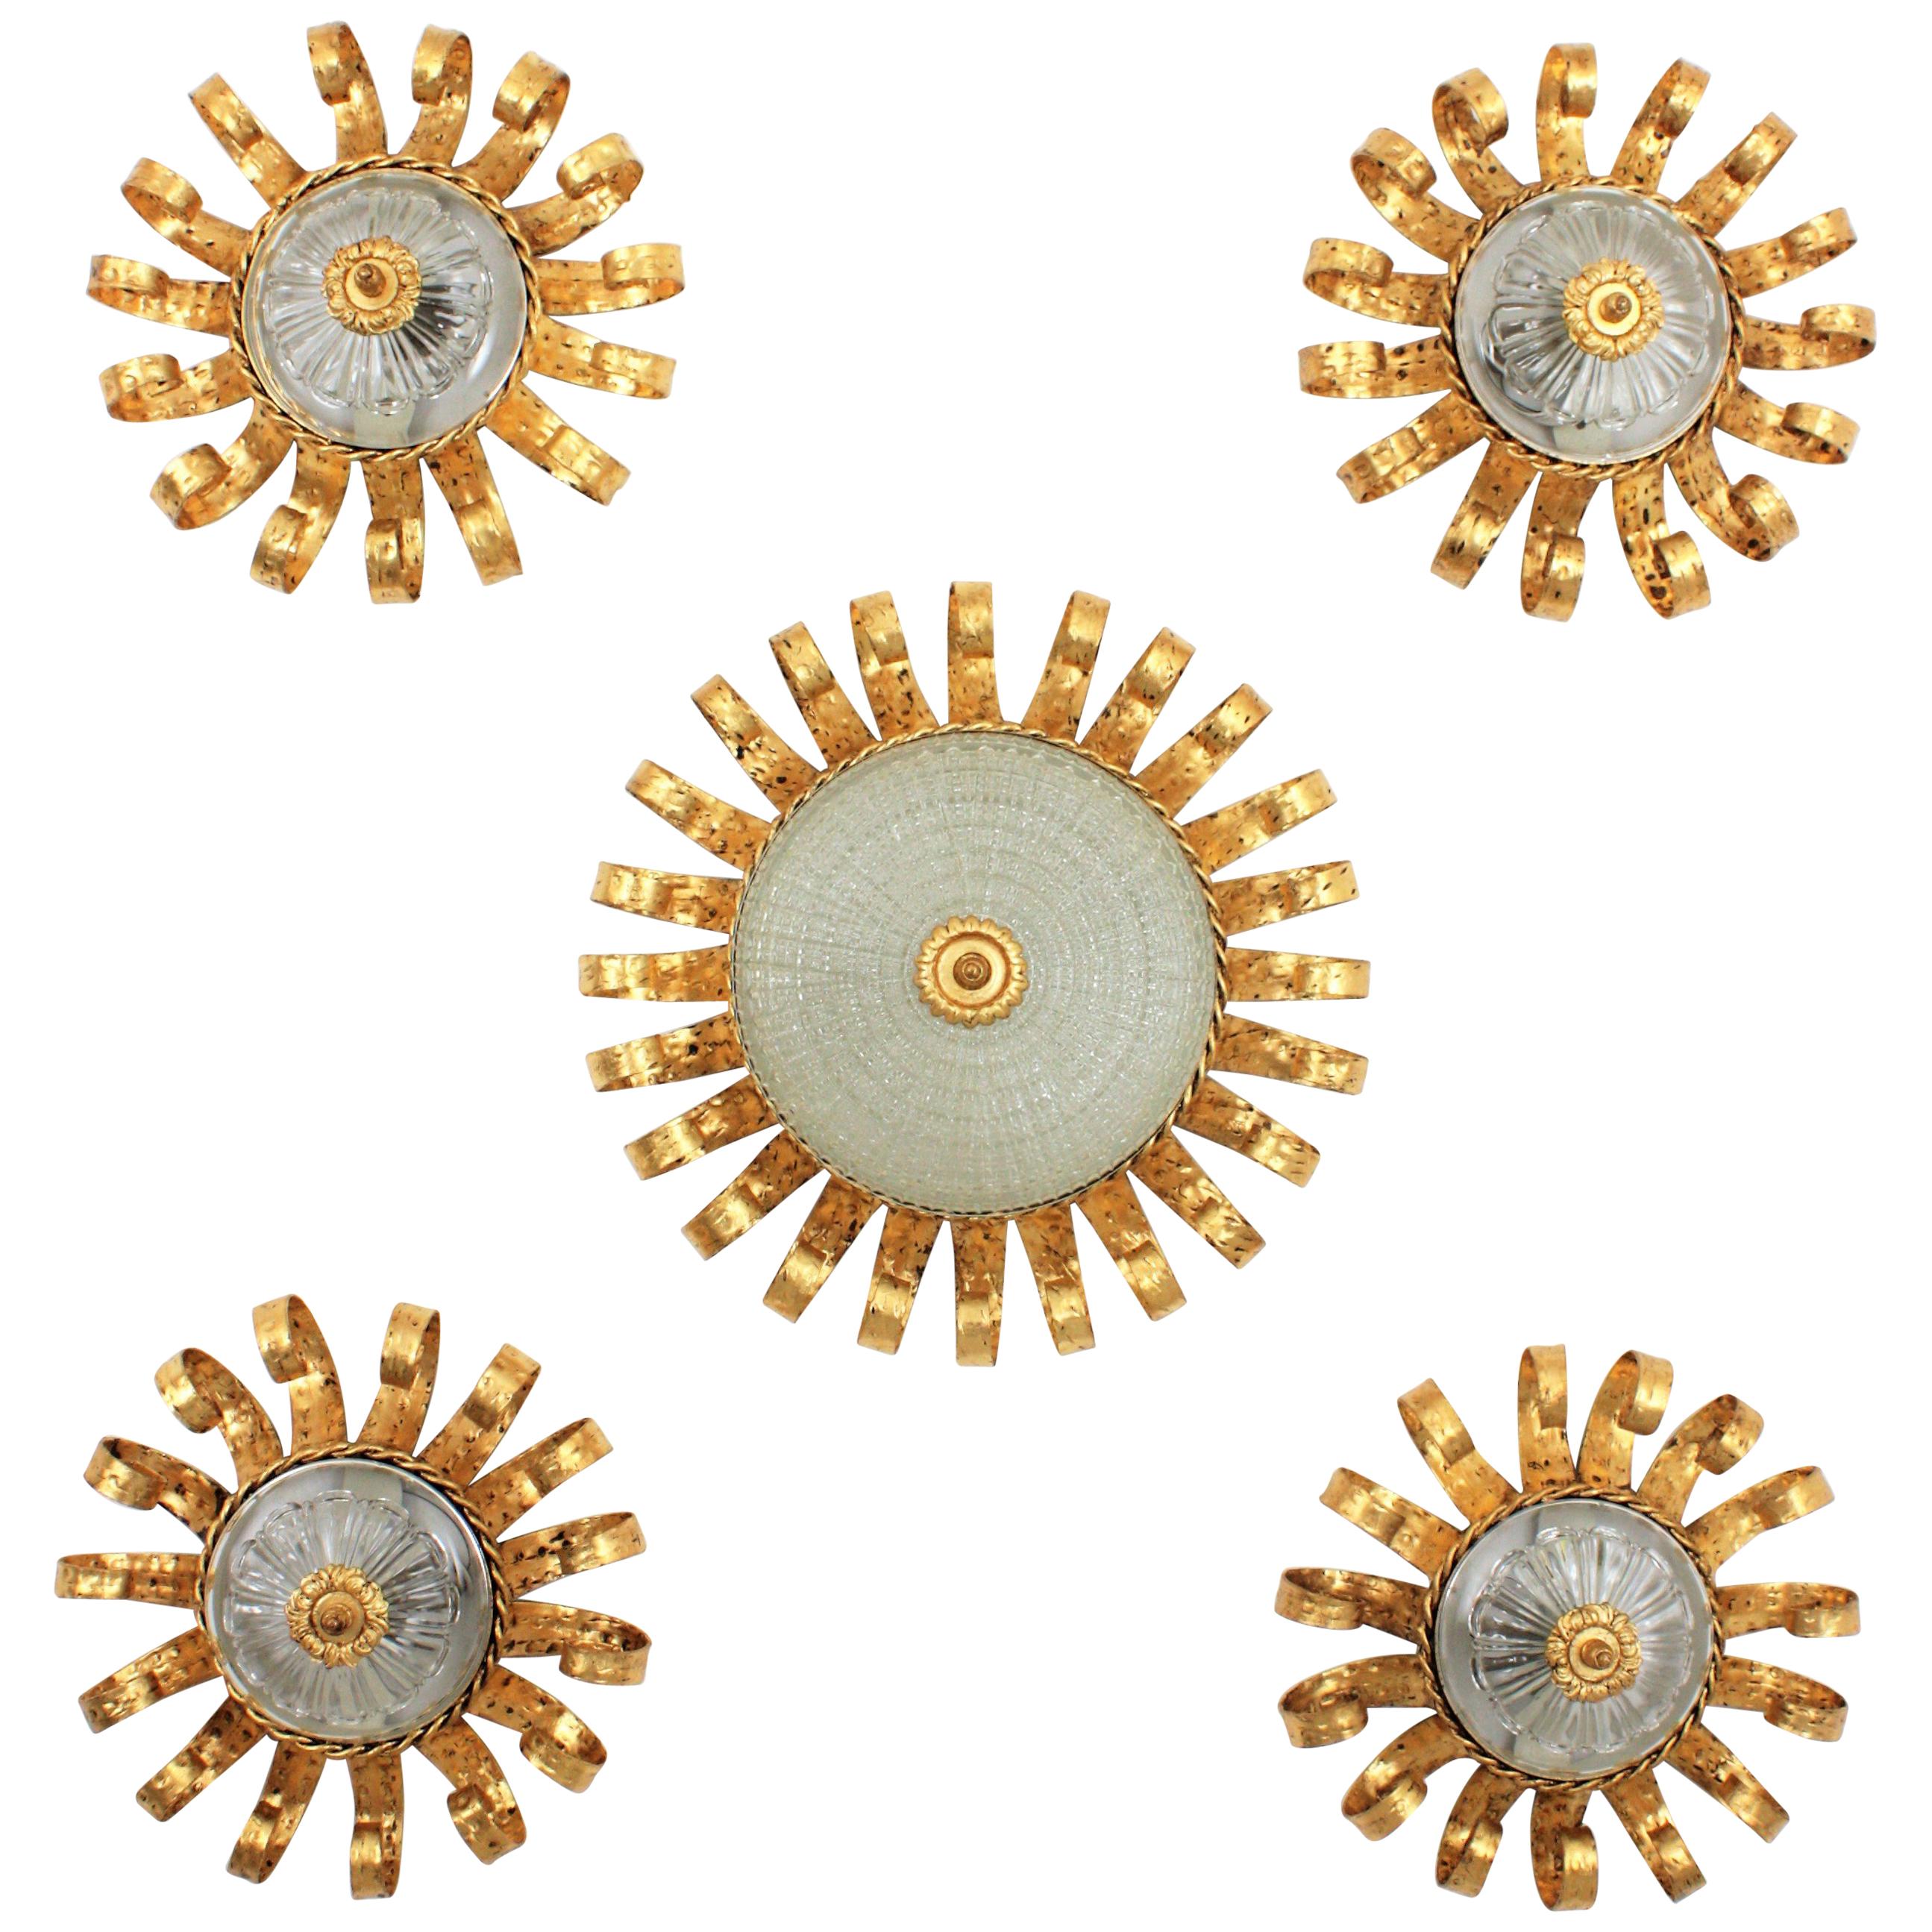 A magnificent set of Brutalist hand-hammered iron sunburst crown light fixtures with scrolled frames, central glass difussors and gold leaf finish.
Spain, 1960s.
The set is composed by 4 small flush mounts and a larger one. The hand-hammered work